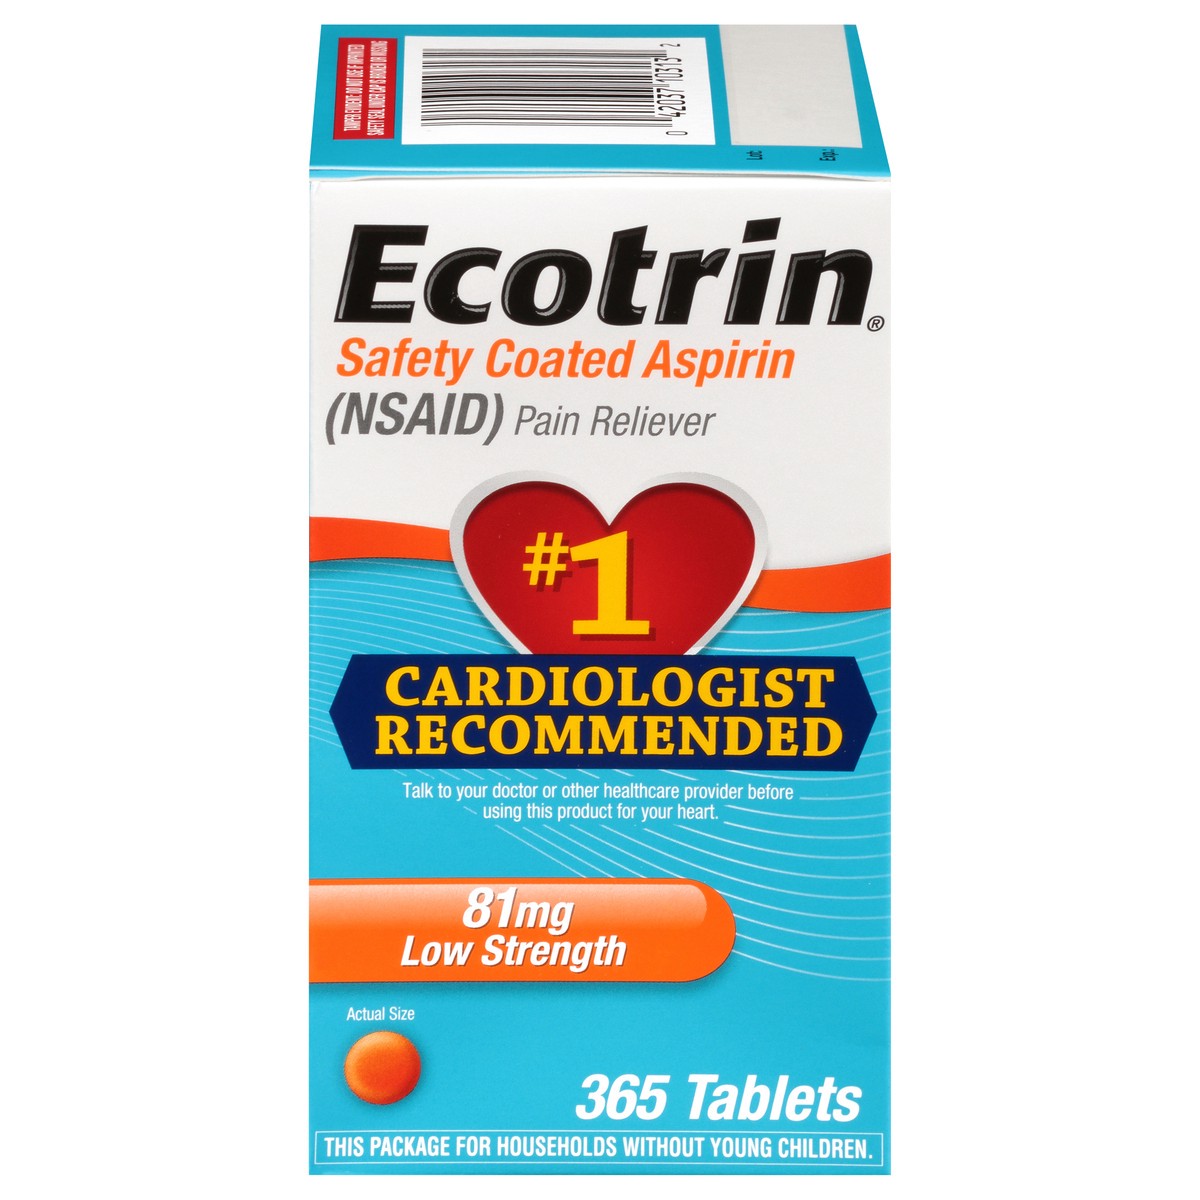 slide 7 of 10, Ecotrin Low Strength Safety Coated Aspirin, NSAID, 81mg, 365 Tablets, 365 pk